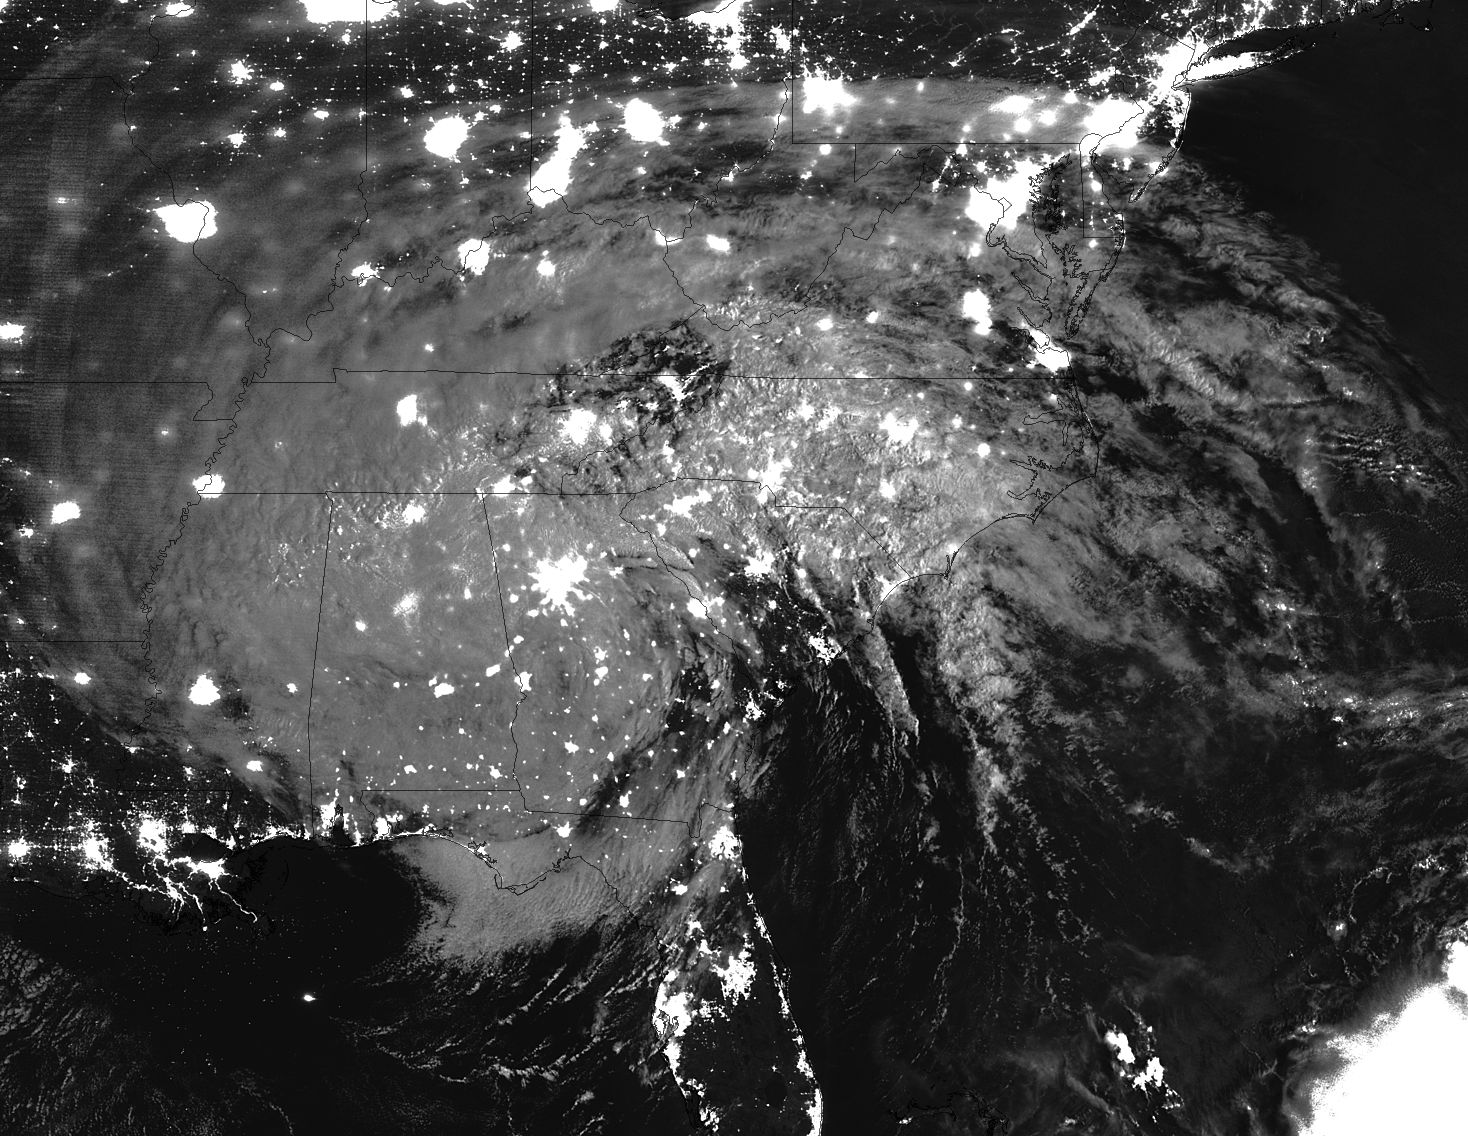 Nighttime satellite image of Irma with electric lights visible through the white cloud mass over the southeastern US.